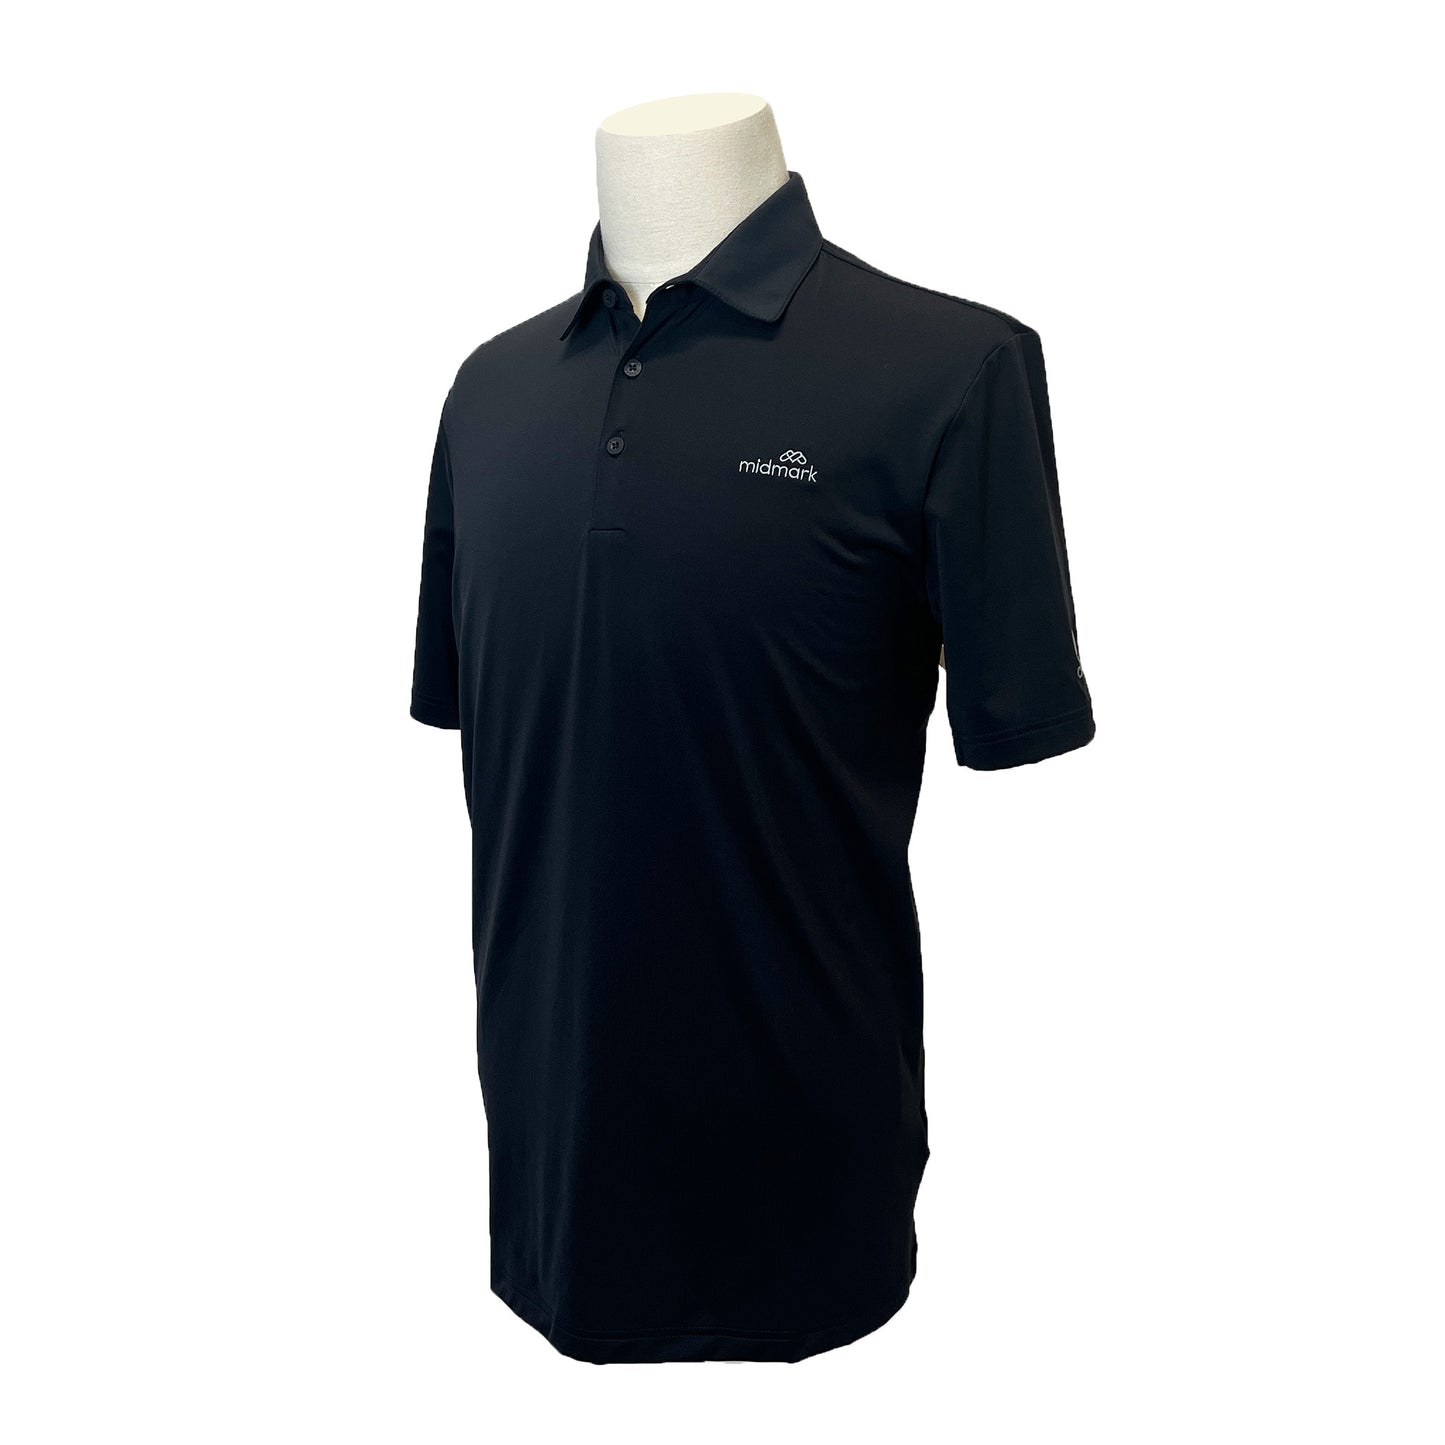 Adidas Men's Ultimate365 Solid Polo